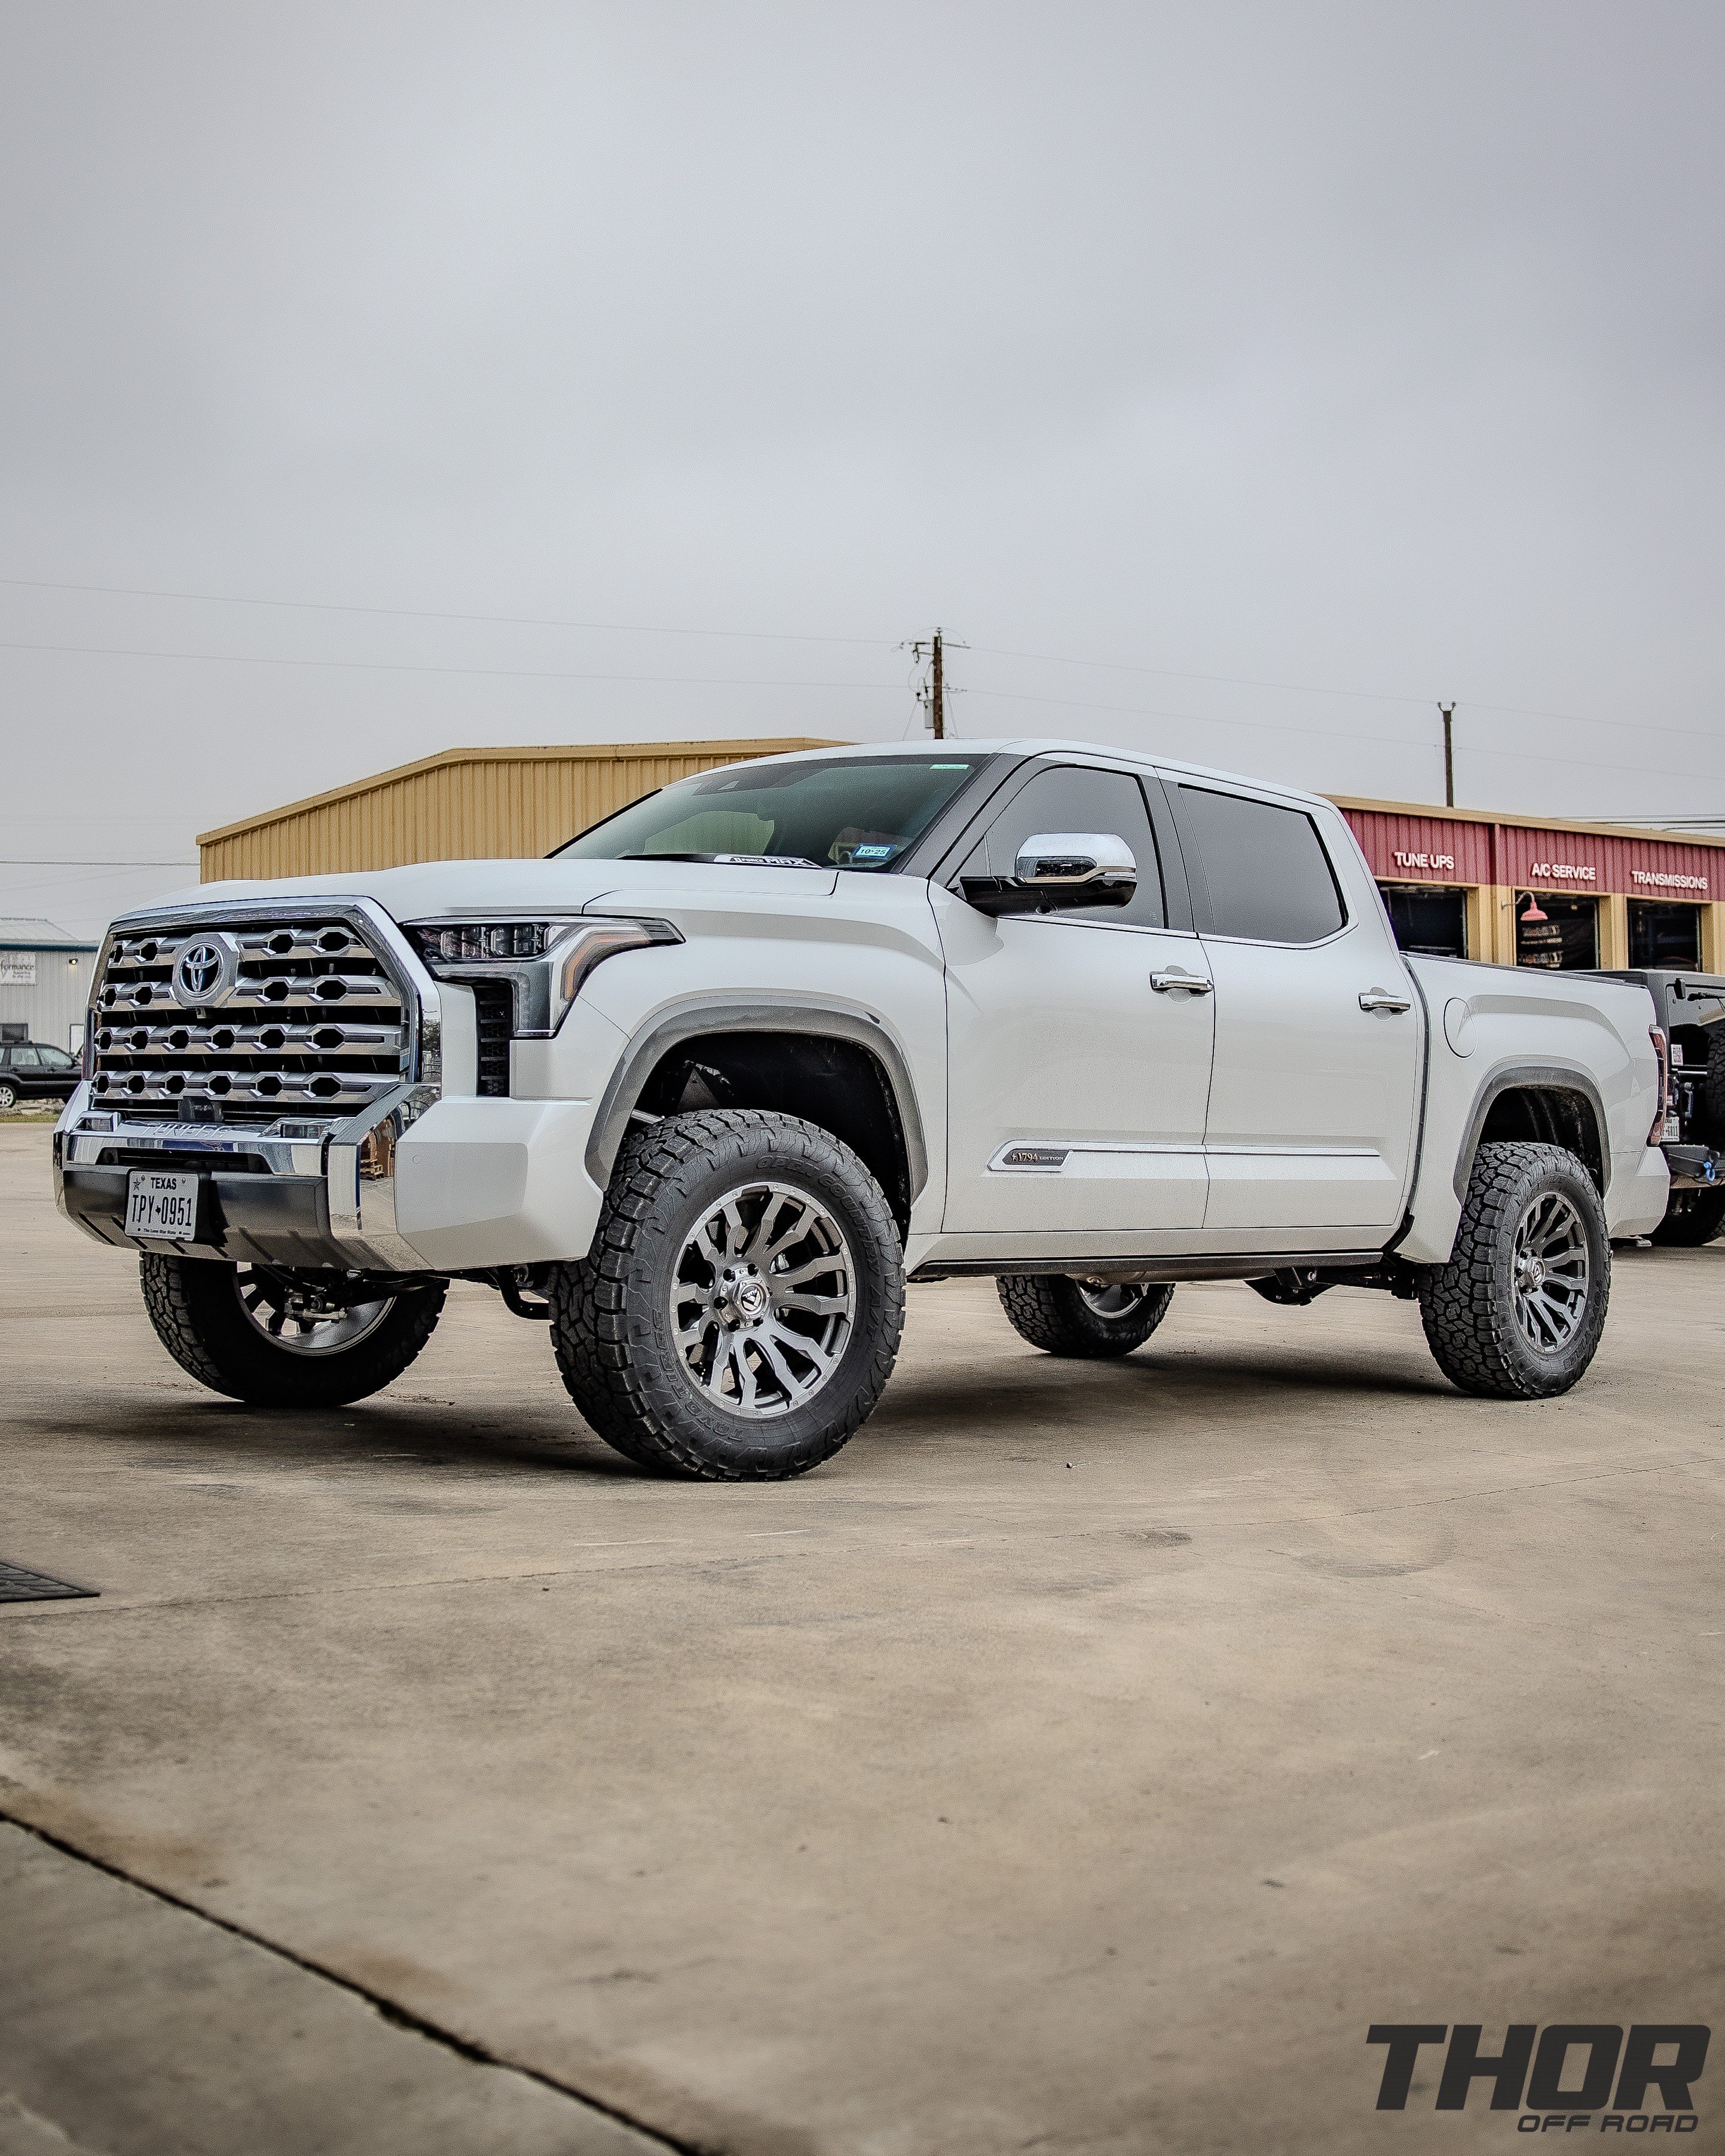 2023 Toyota Tundra 1794 Edition in Wind Chill Pearl with Rough Country 3.5" Lift Kit, Fuel Blitz 20x9" Wheels, 35x12.50R20 Toyo ATIII Tires